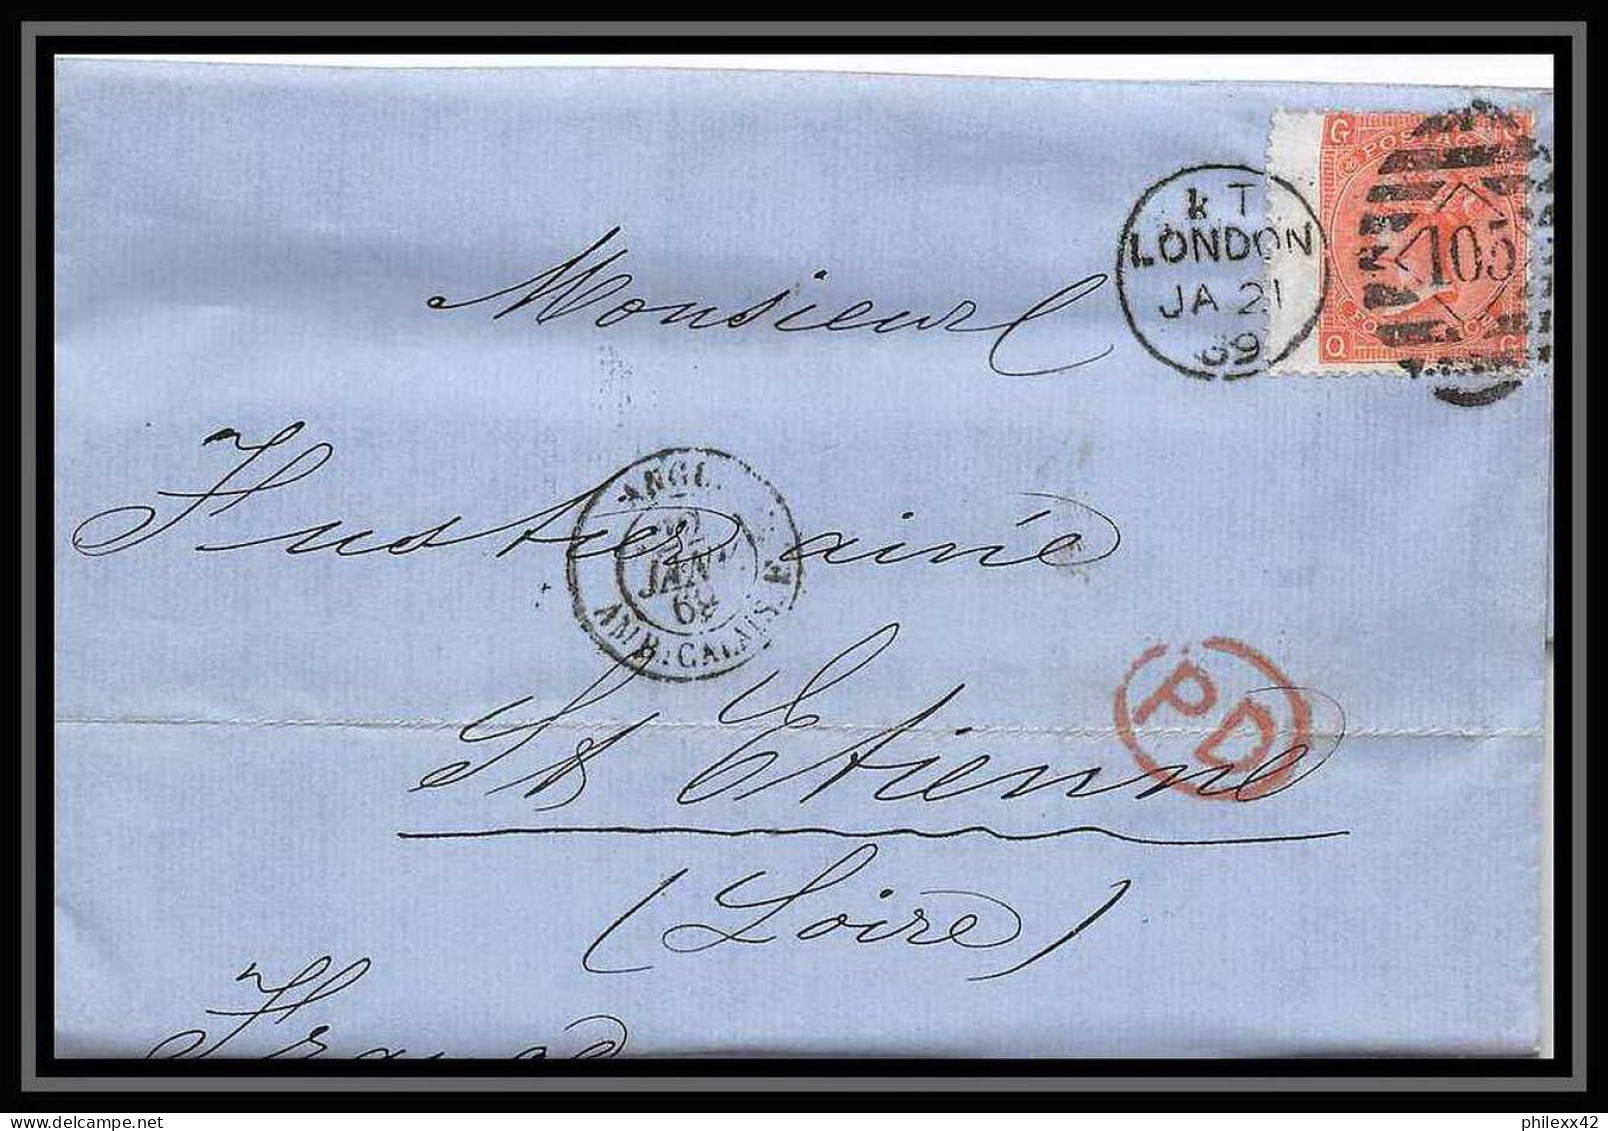 35858 N°32 Victoria 4p Red London St Etienne France 1869 Cachet 105 Lettre Cover Grande Bretagne England - Covers & Documents